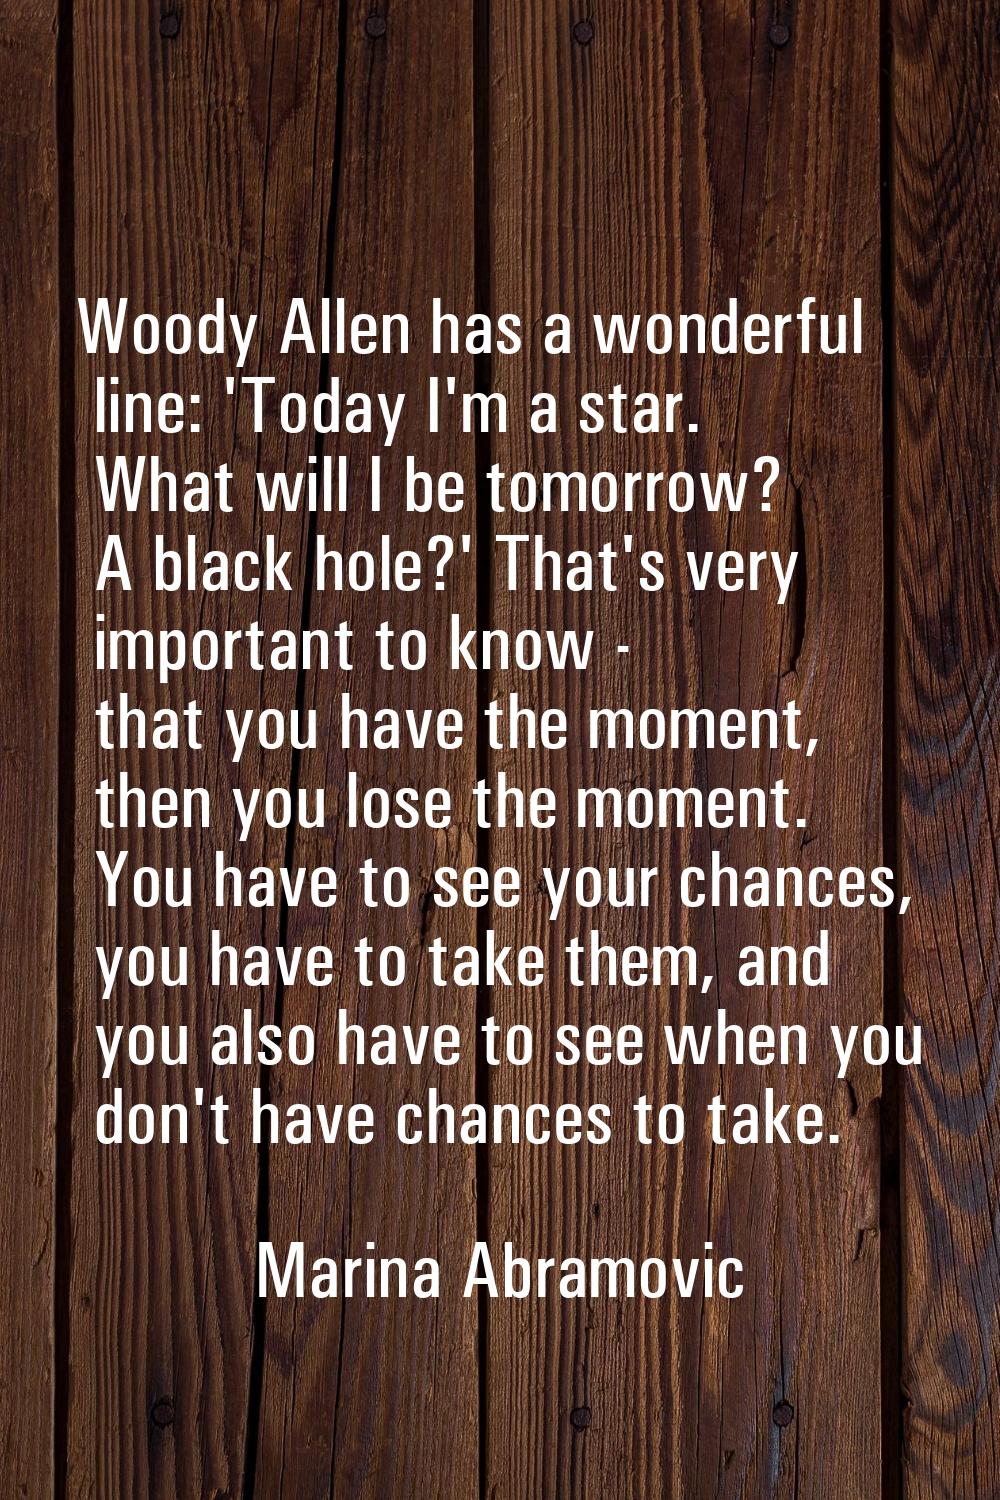 Woody Allen has a wonderful line: 'Today I'm a star. What will I be tomorrow? A black hole?' That's